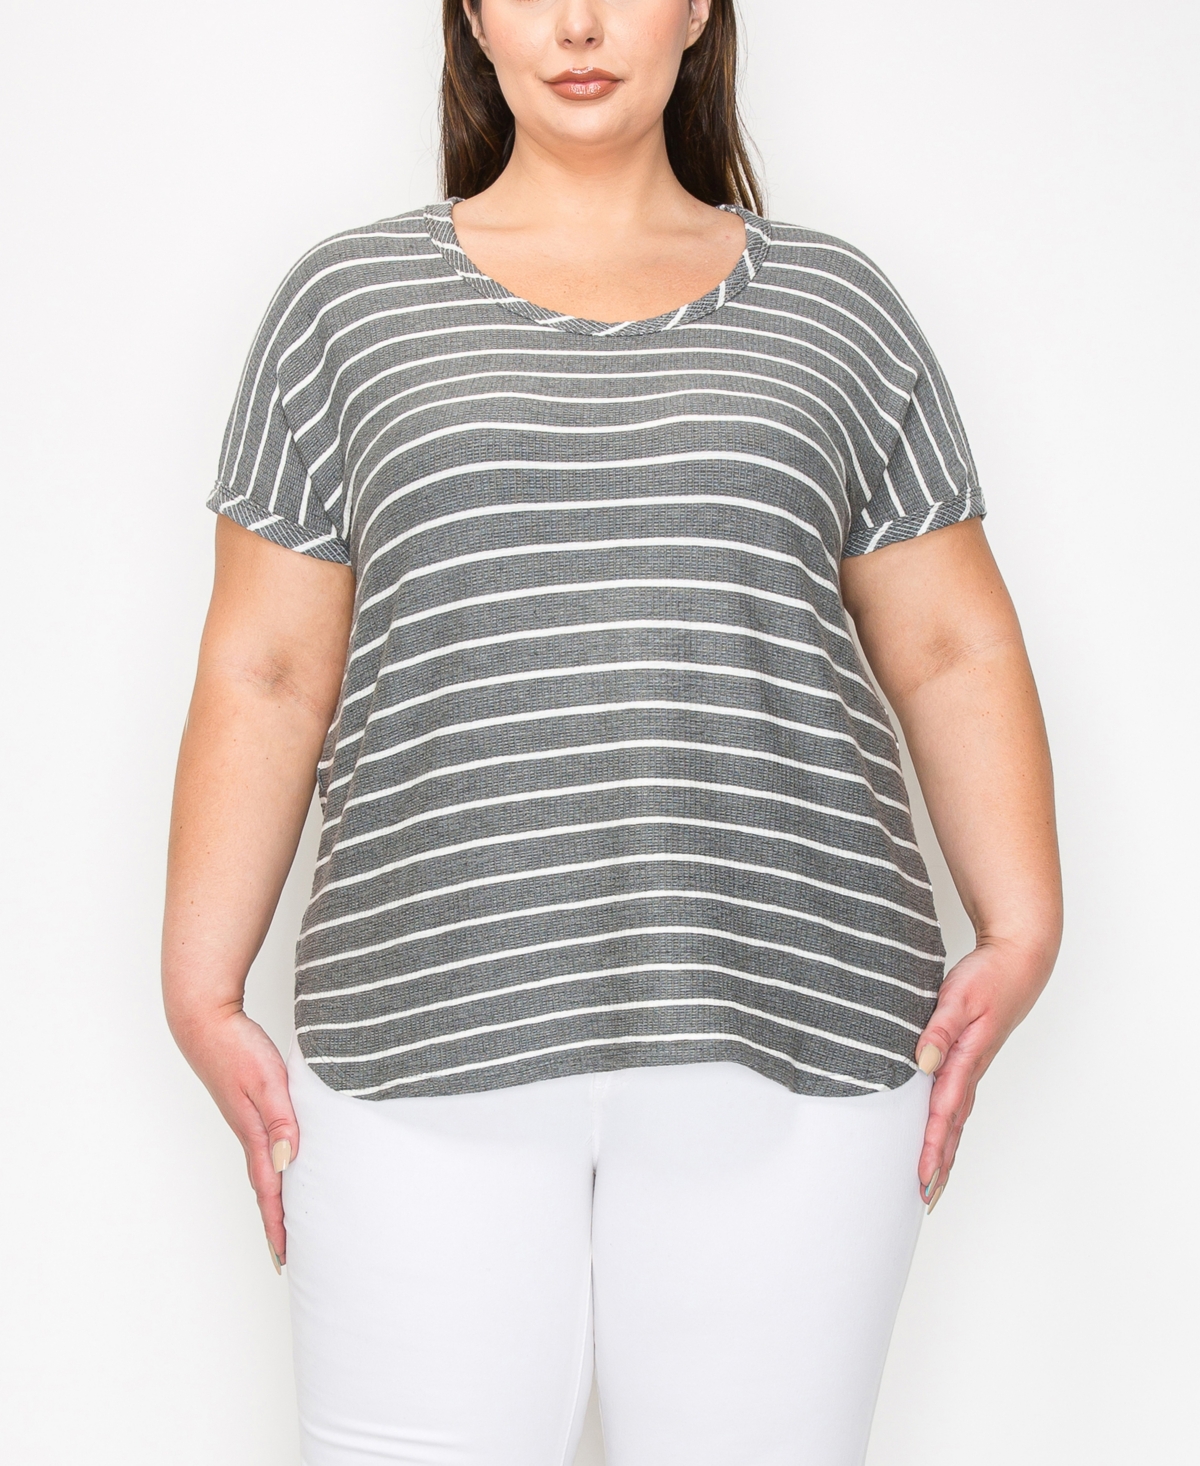 Coin 1804 Plus Size Pointelle Stripe Dolman Short Sleeve Top In Charcoal Ivory